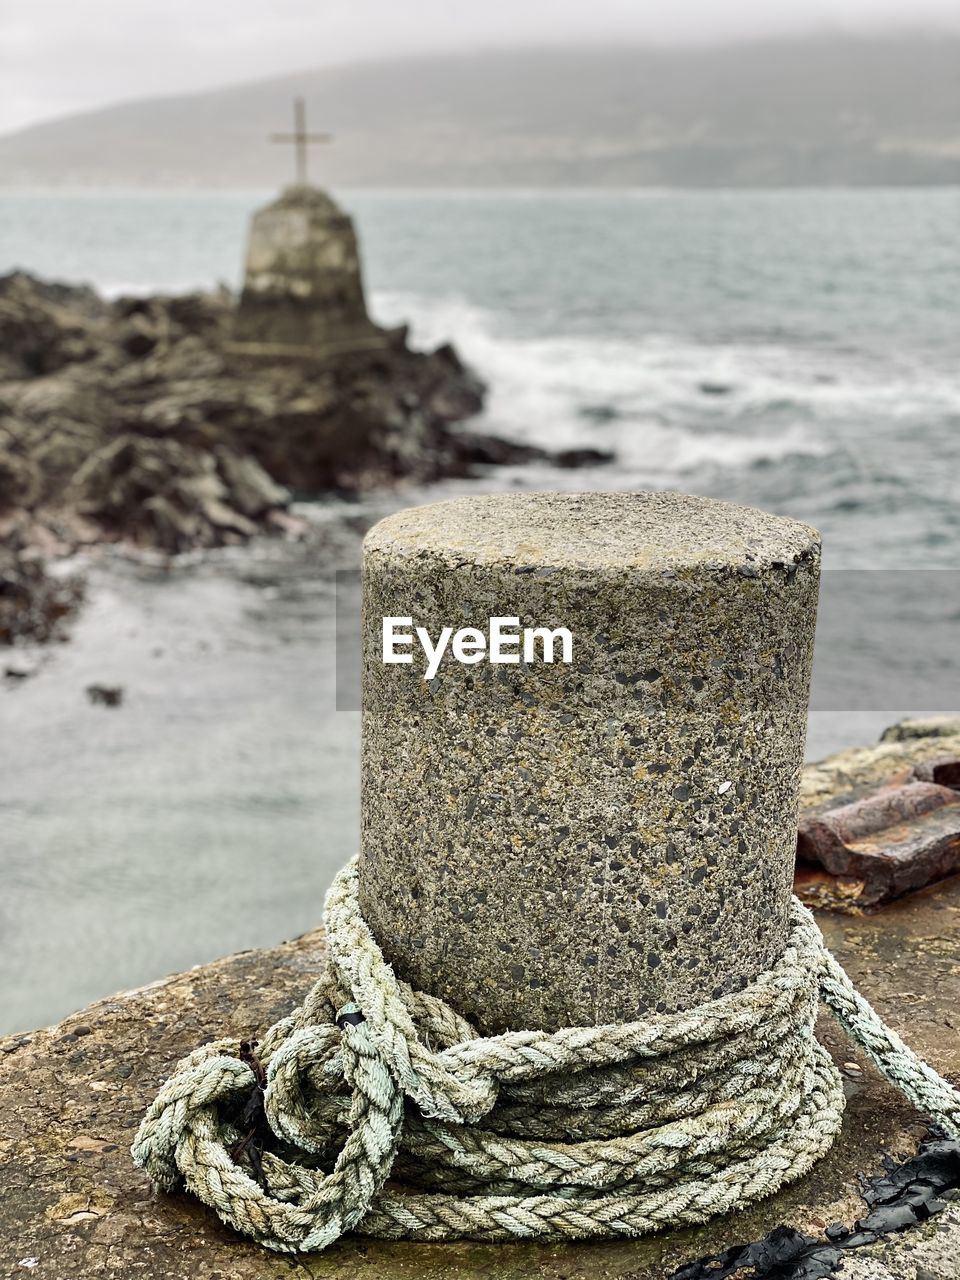 water, sea, beach, land, rock, rope, coast, nature, sand, no people, focus on foreground, shore, day, outdoors, sky, nautical vessel, harbor, post, strength, tied up, bollard, transportation, close-up, ocean